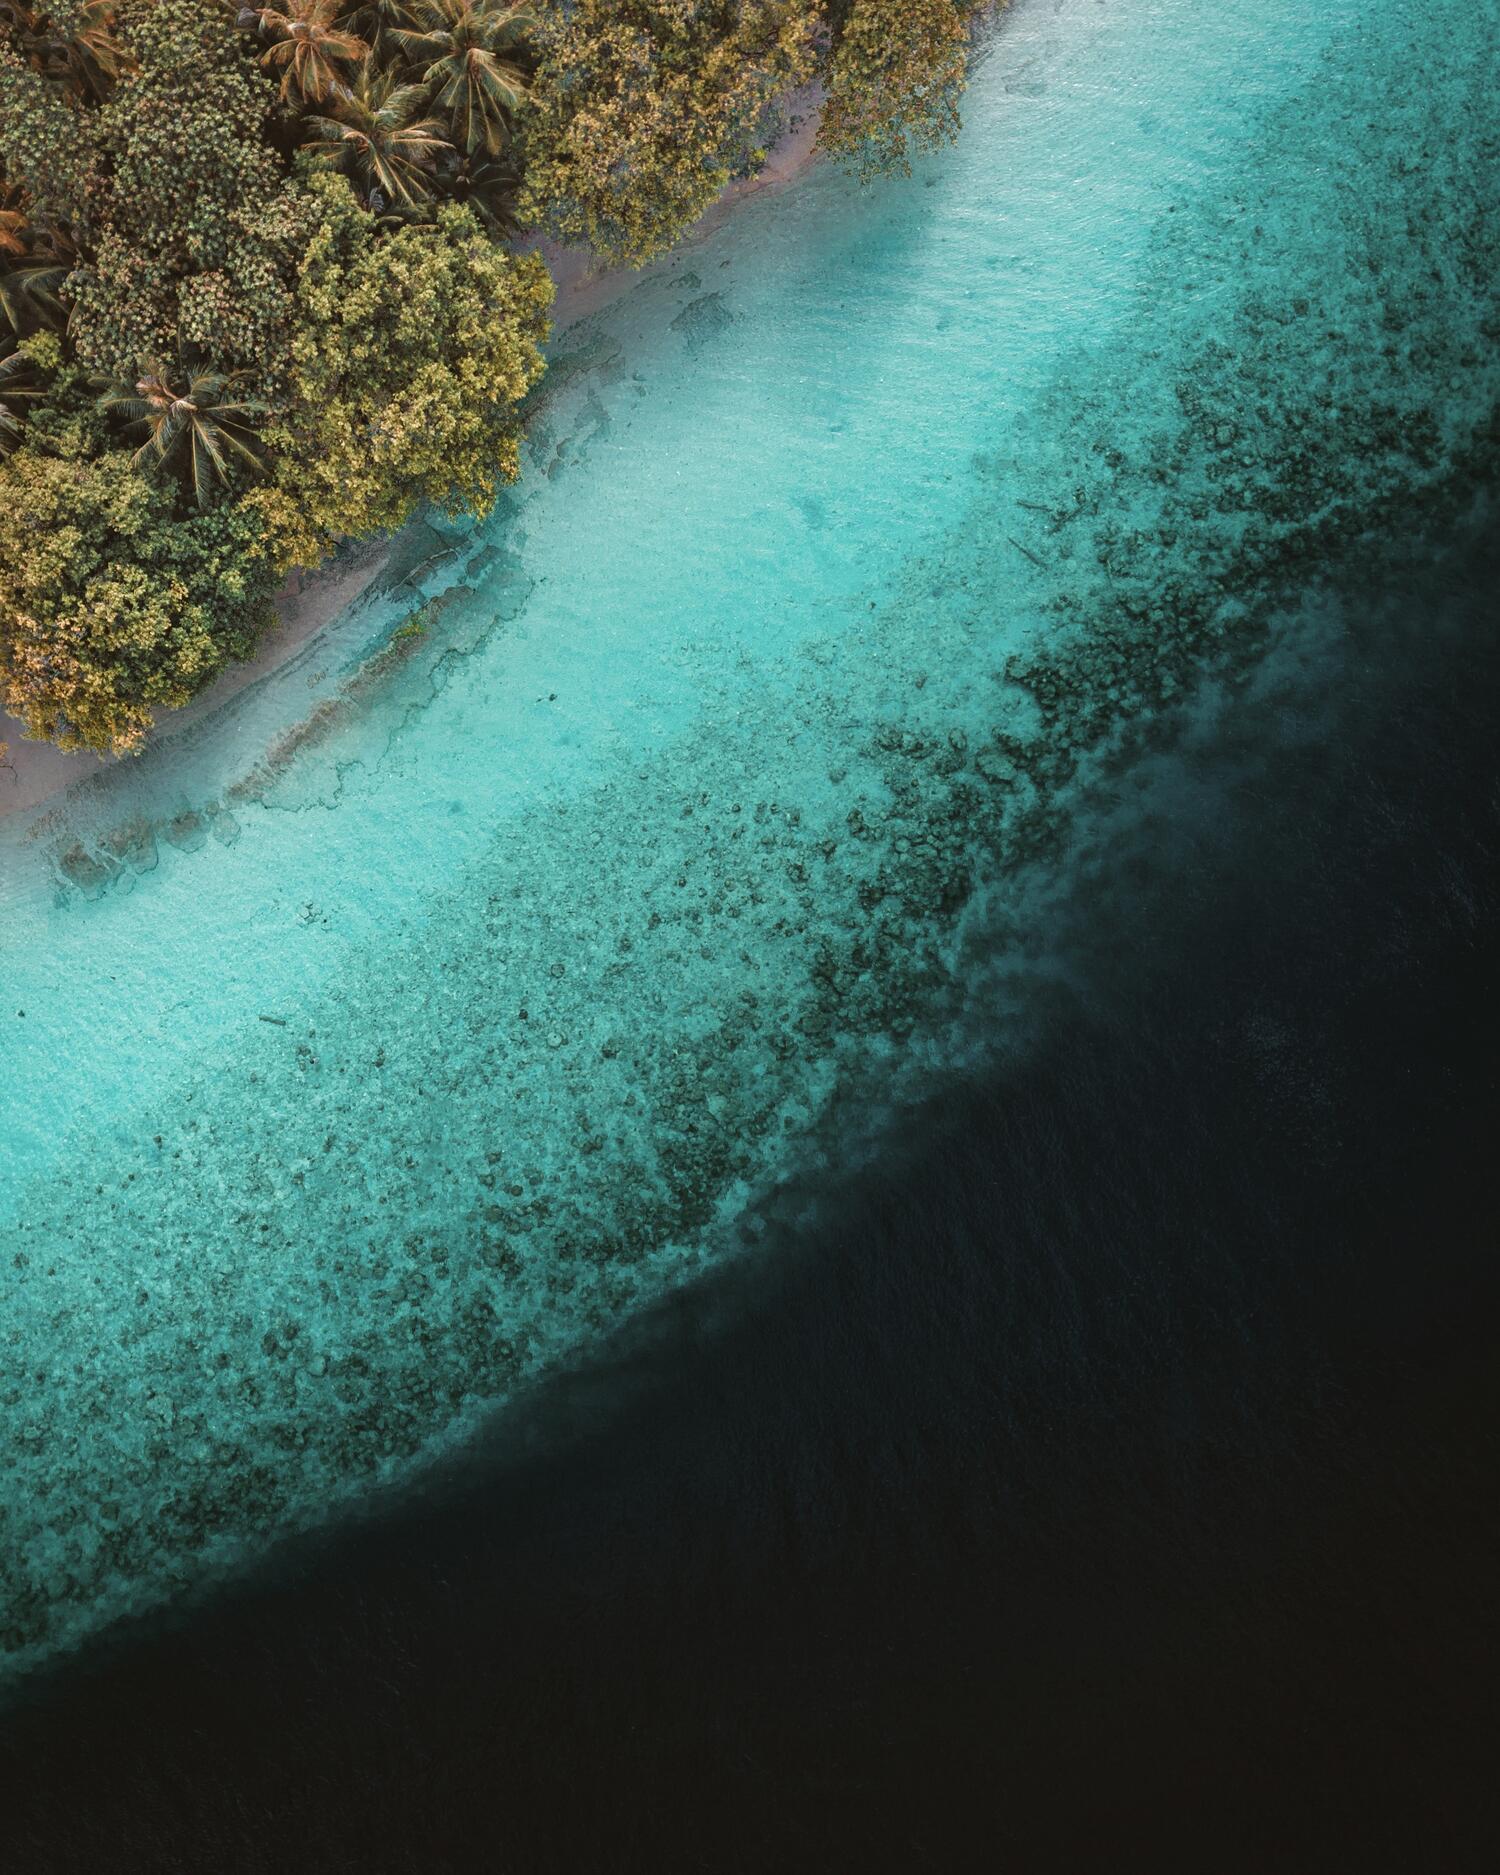 dark ocean next to shallow light blue water with mangrove trees and a small beach